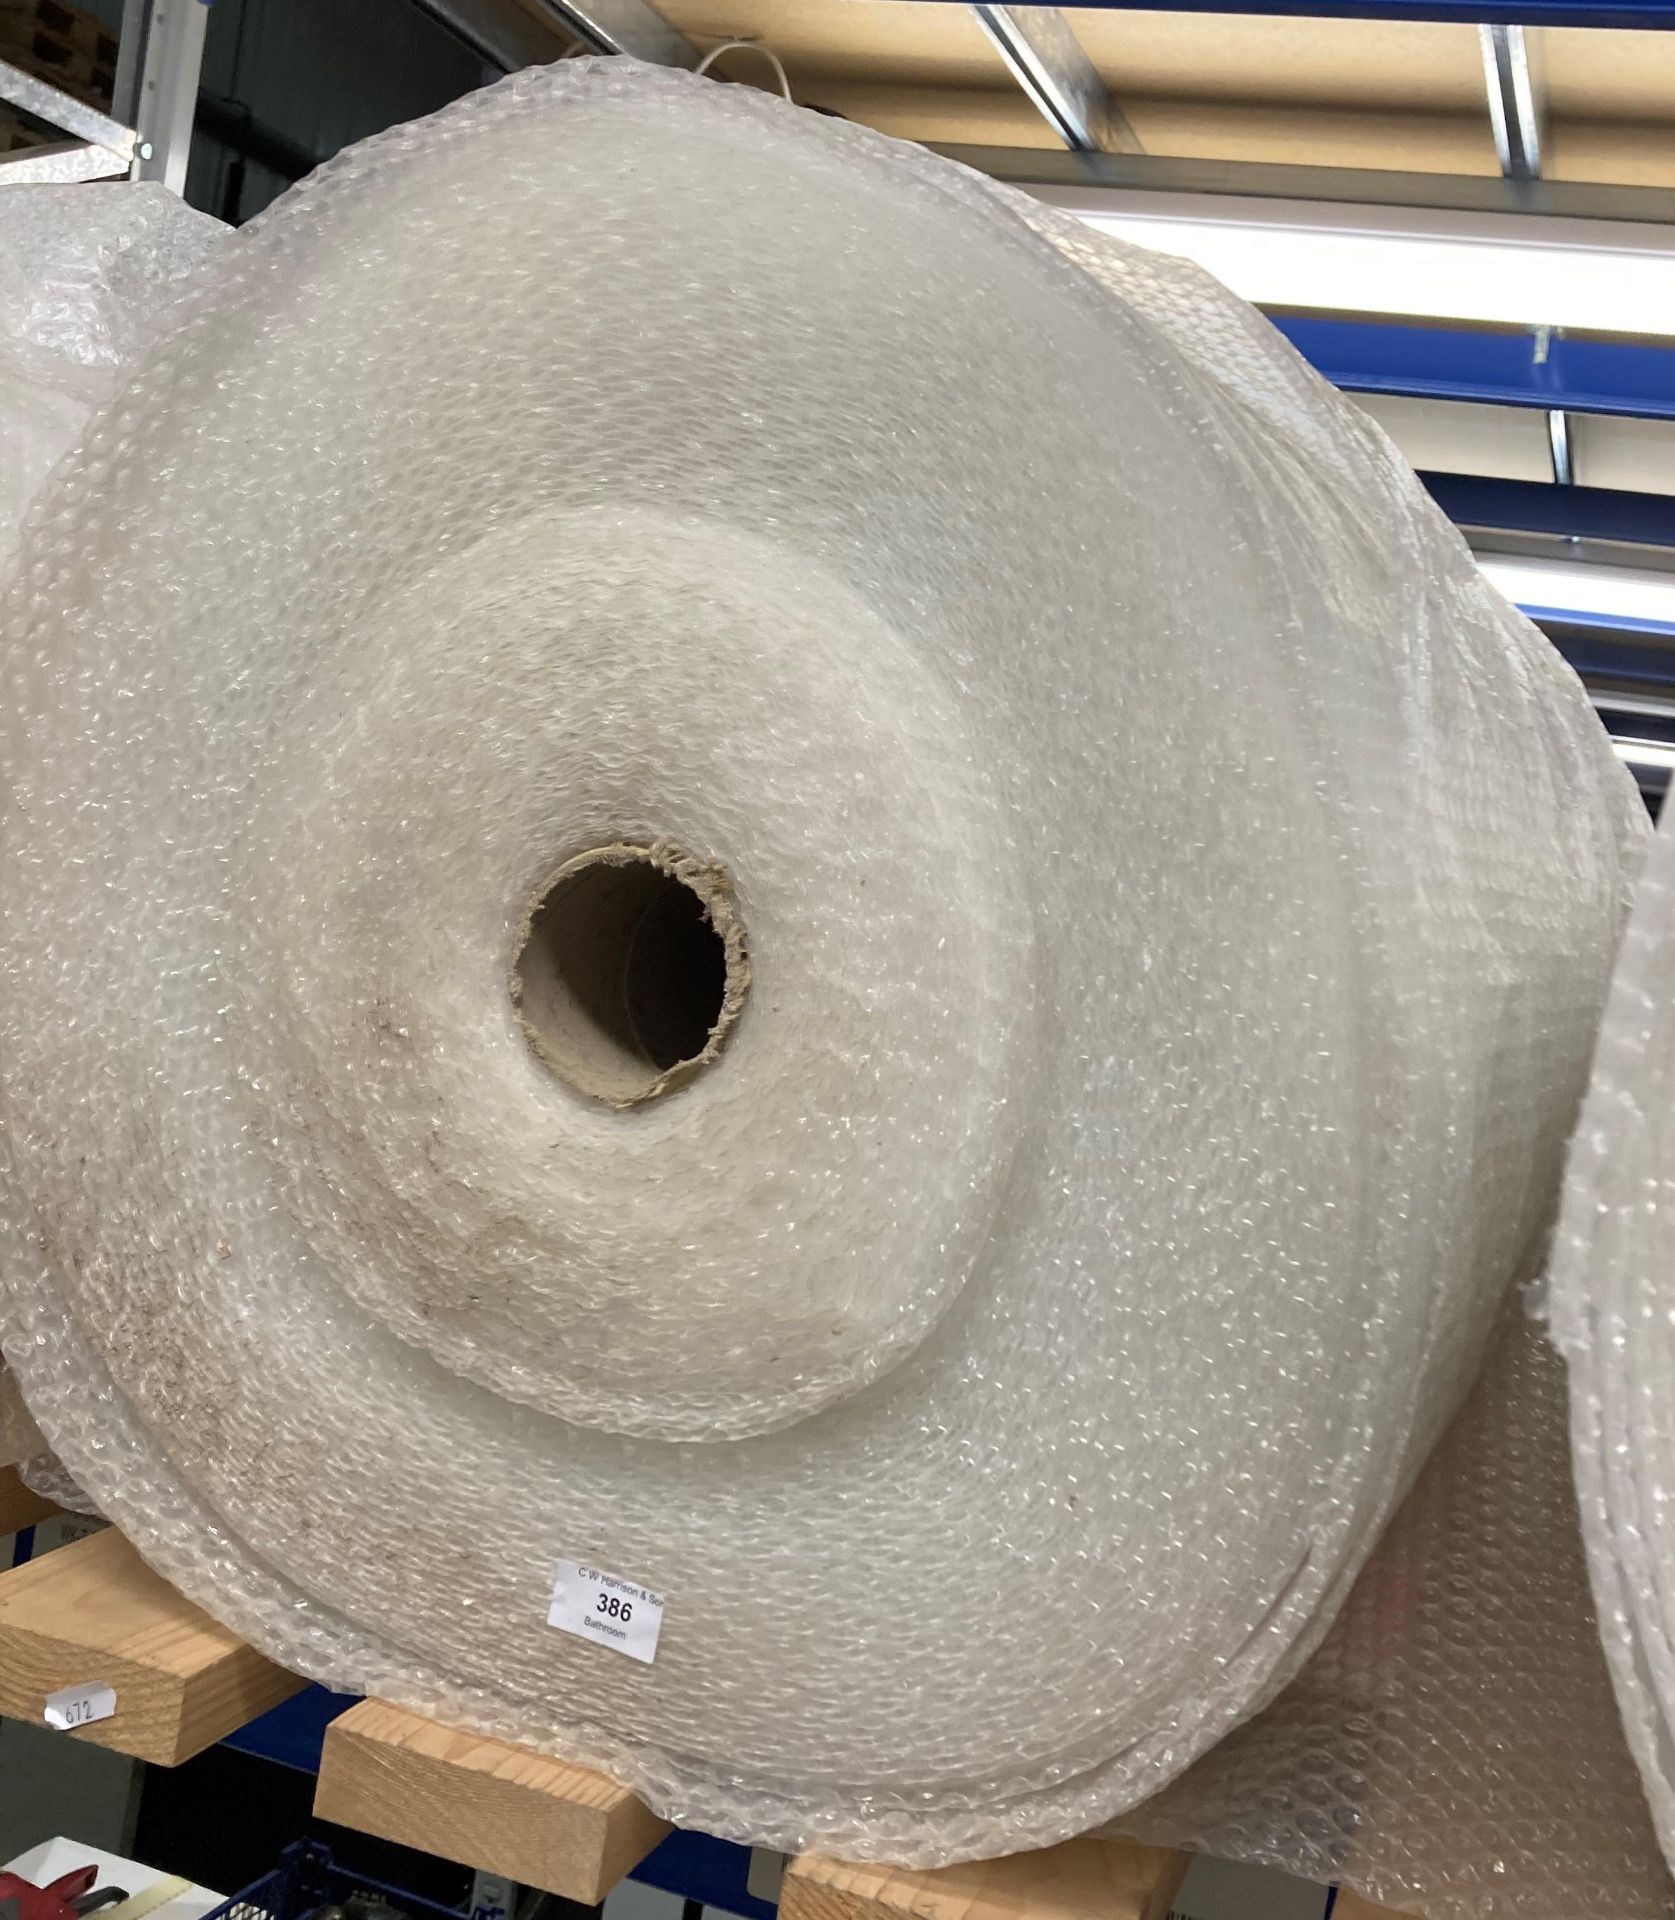 Large roll of bubble wrap (saleroom location: TOP T01)